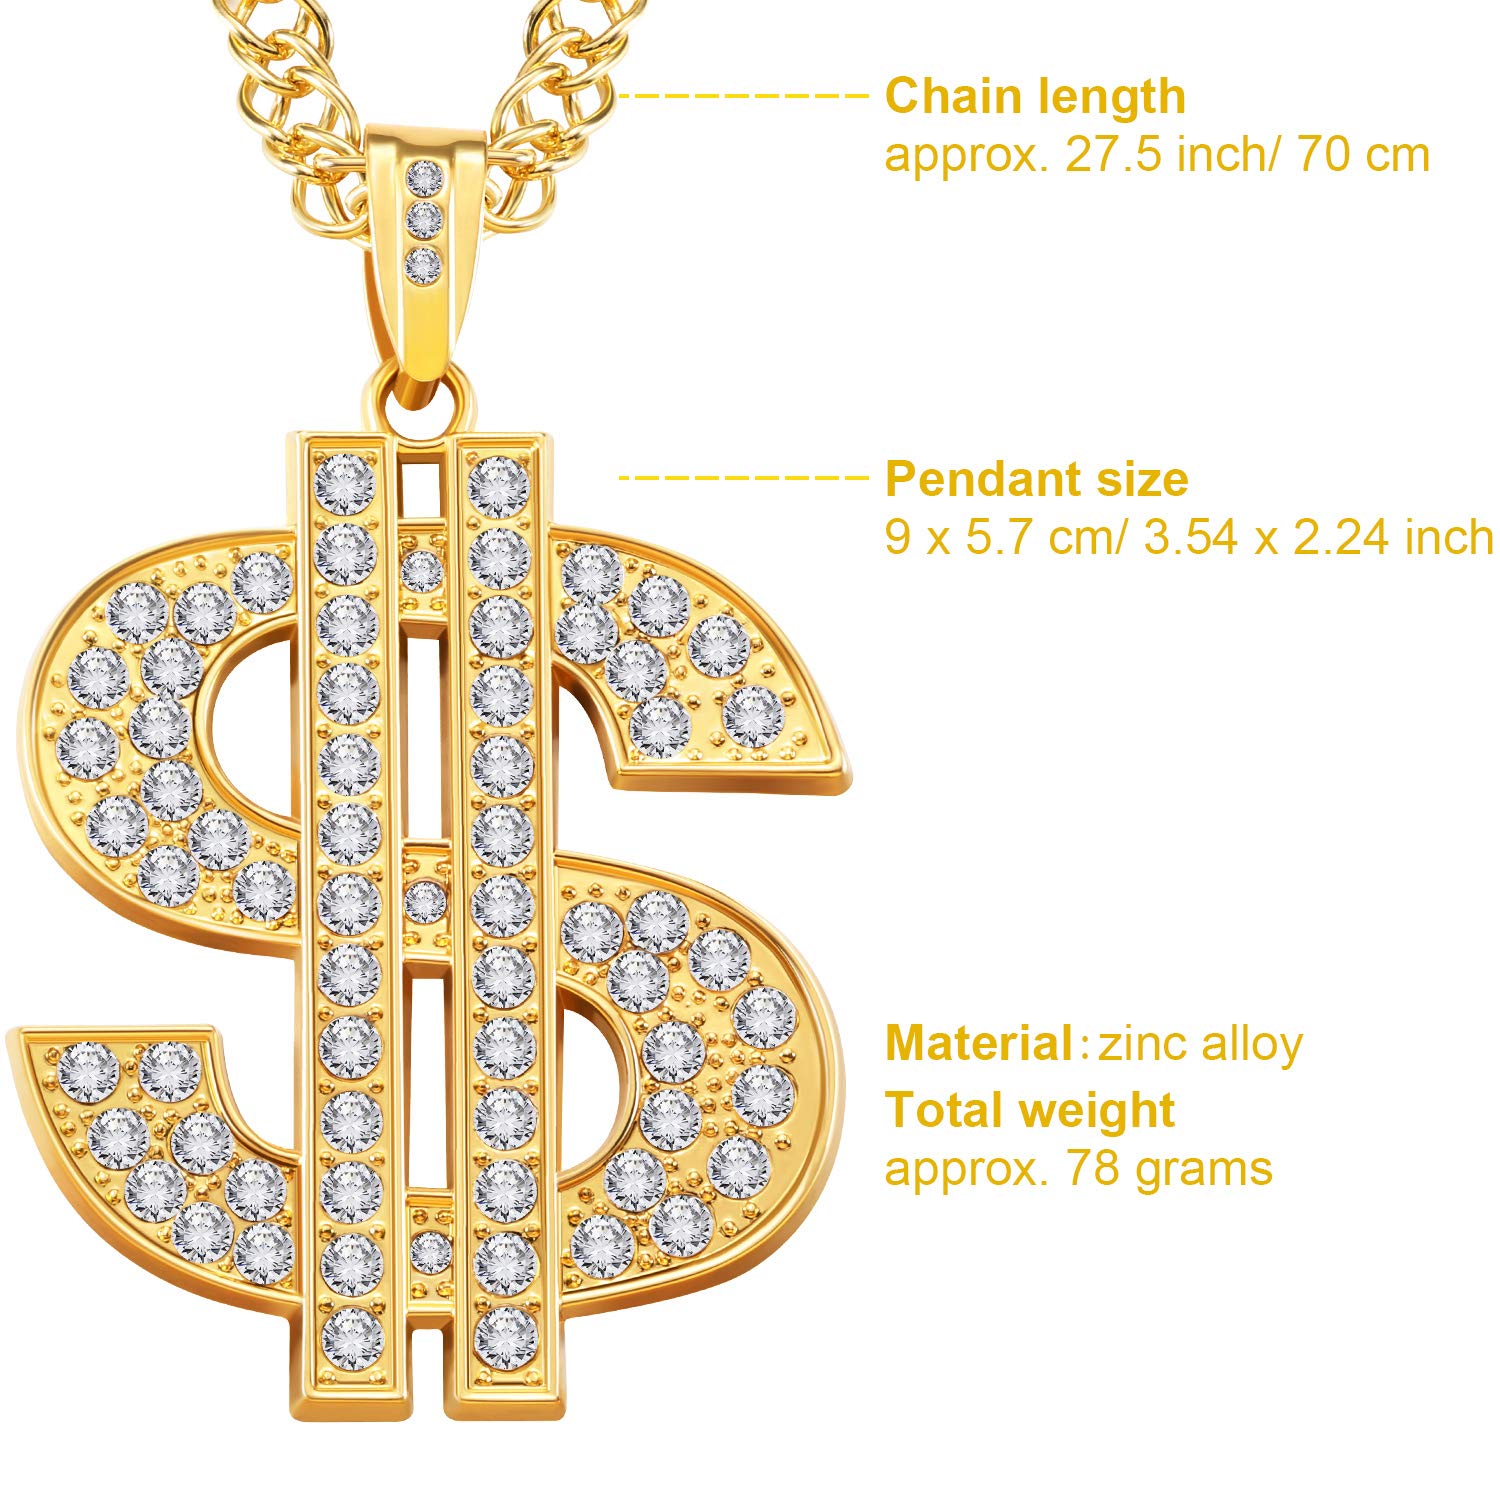 2 Pieces Plated Chain for Men with Dollar Sign Pendant Necklace, Dollar Necklace